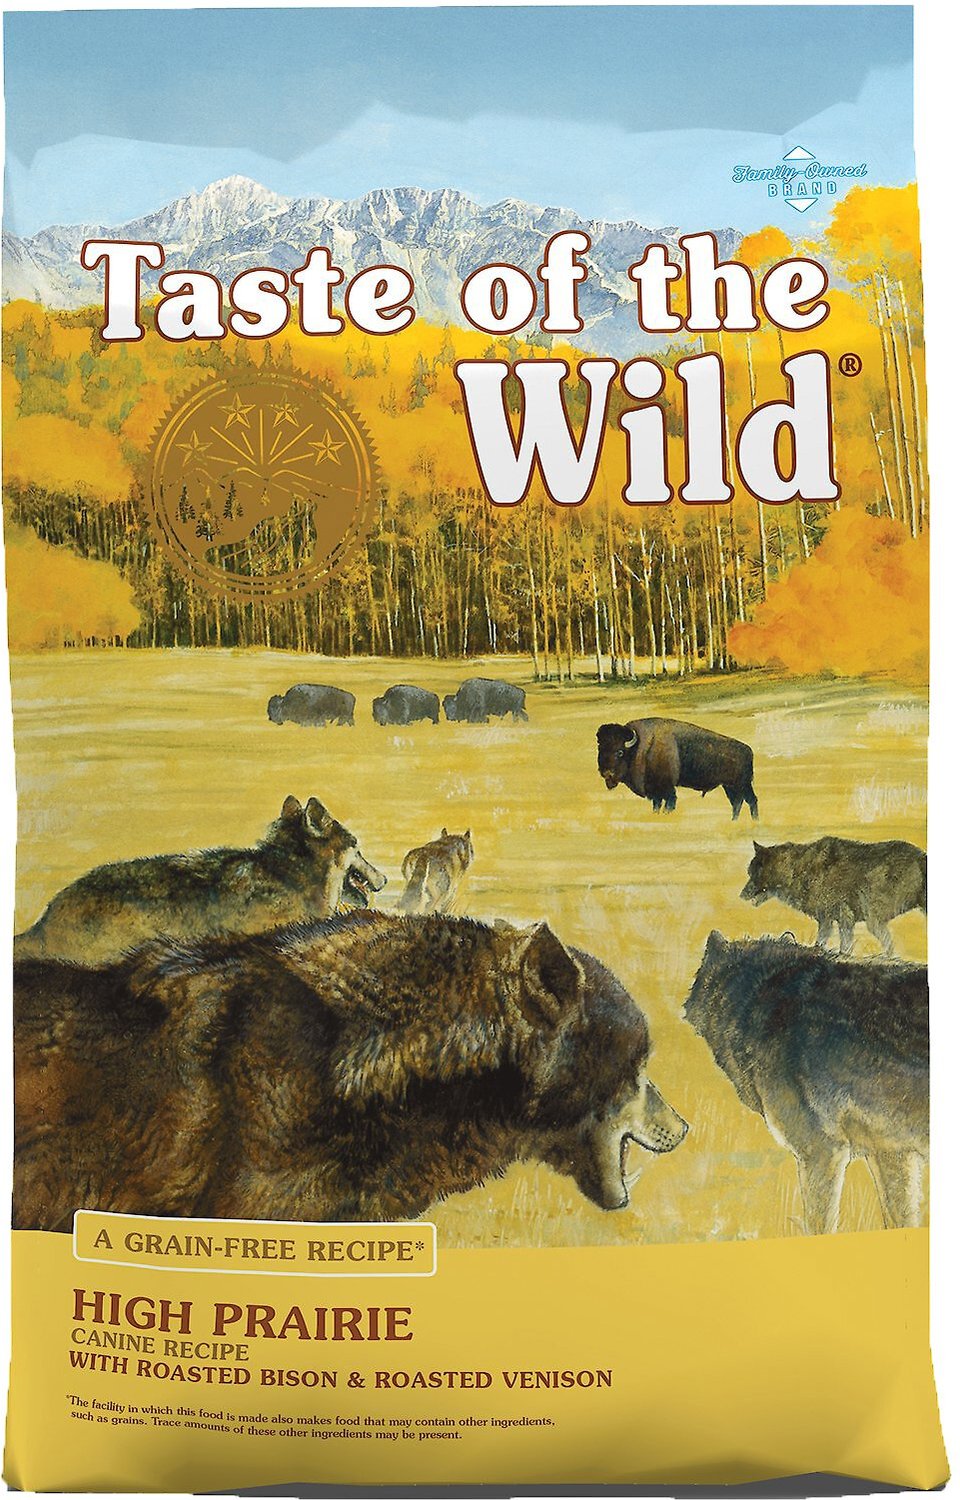 What is Wrong With Taste of the Wild Dog Food?